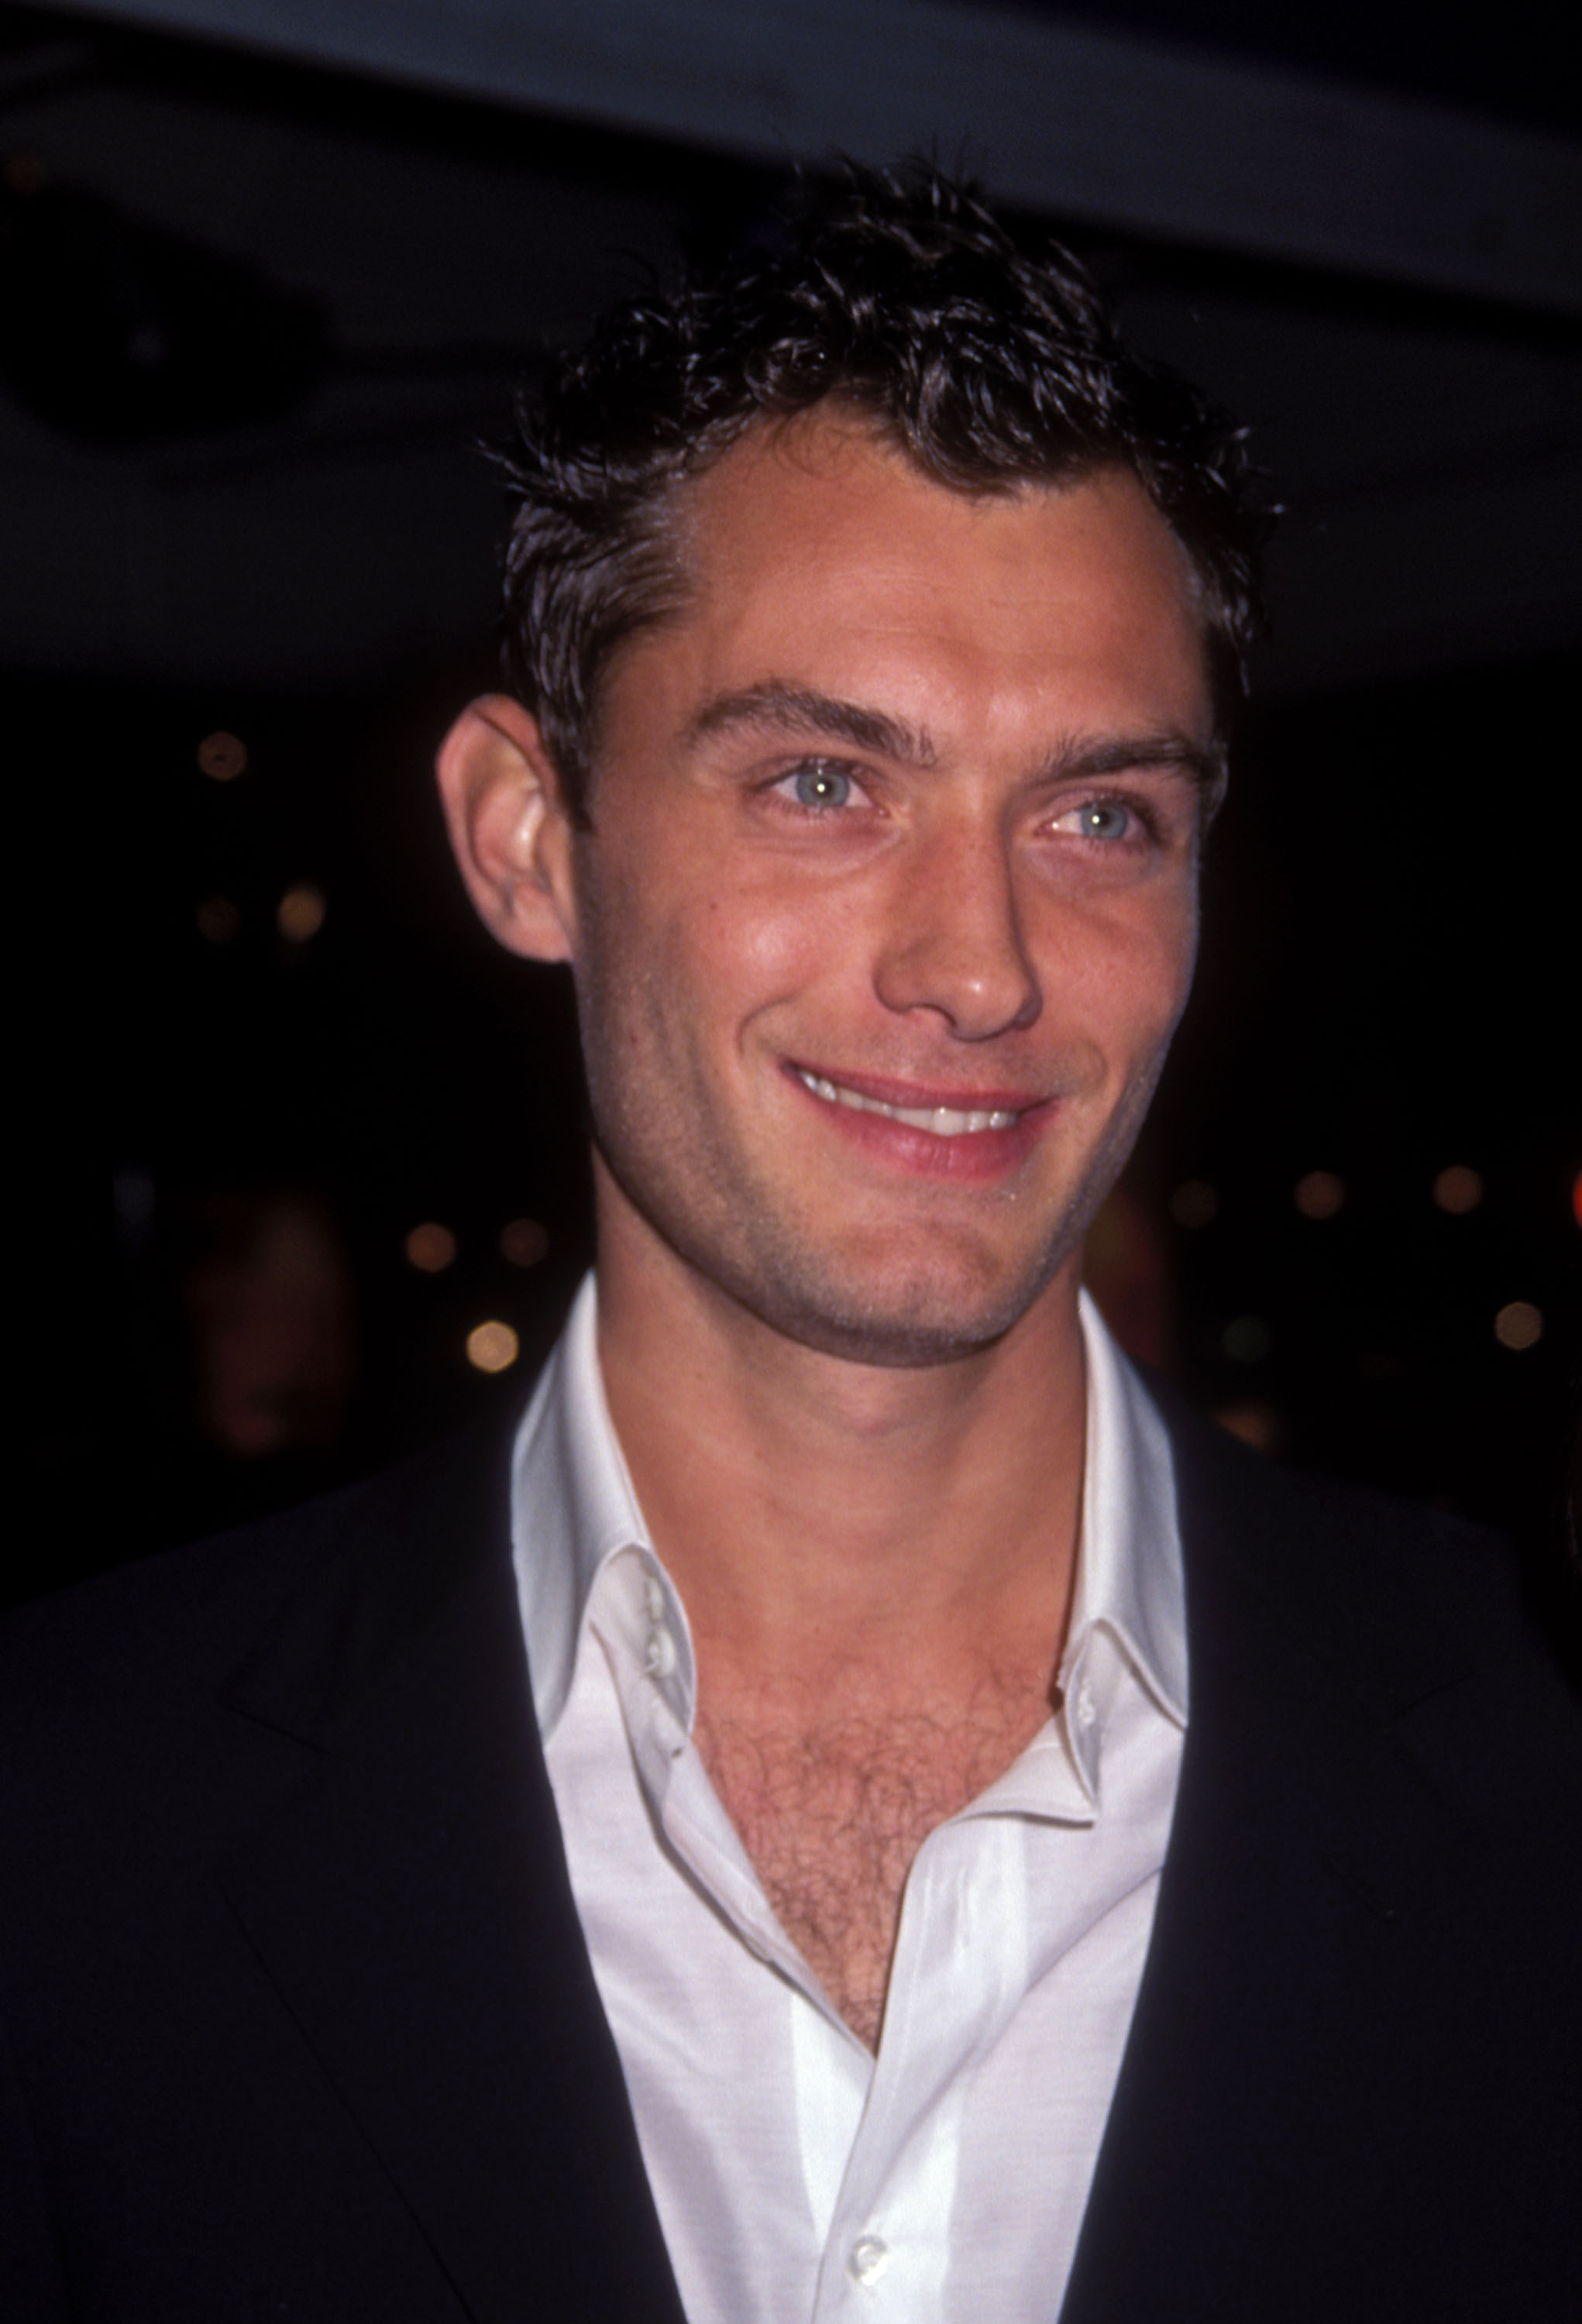 Jude Law at the premiere of "The Talented Mr. Ripley" on December 12, 1999, in  Los Angeles, California. | Source: Getty Images